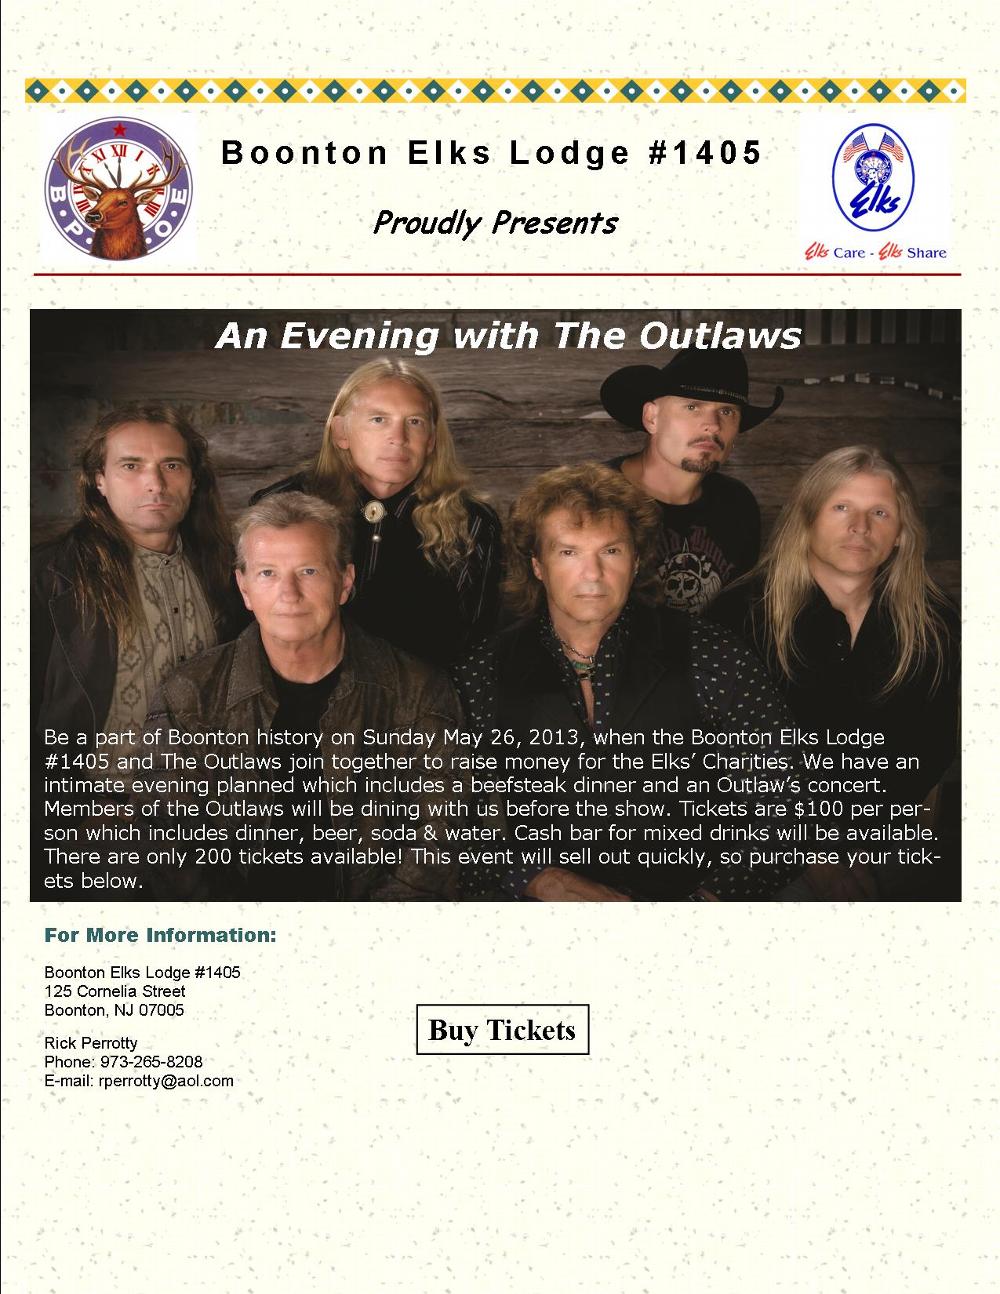 The 2013 Flyer for the "Outlaws".  A nationally renowned southern rock band that played at Boonton Lodge.